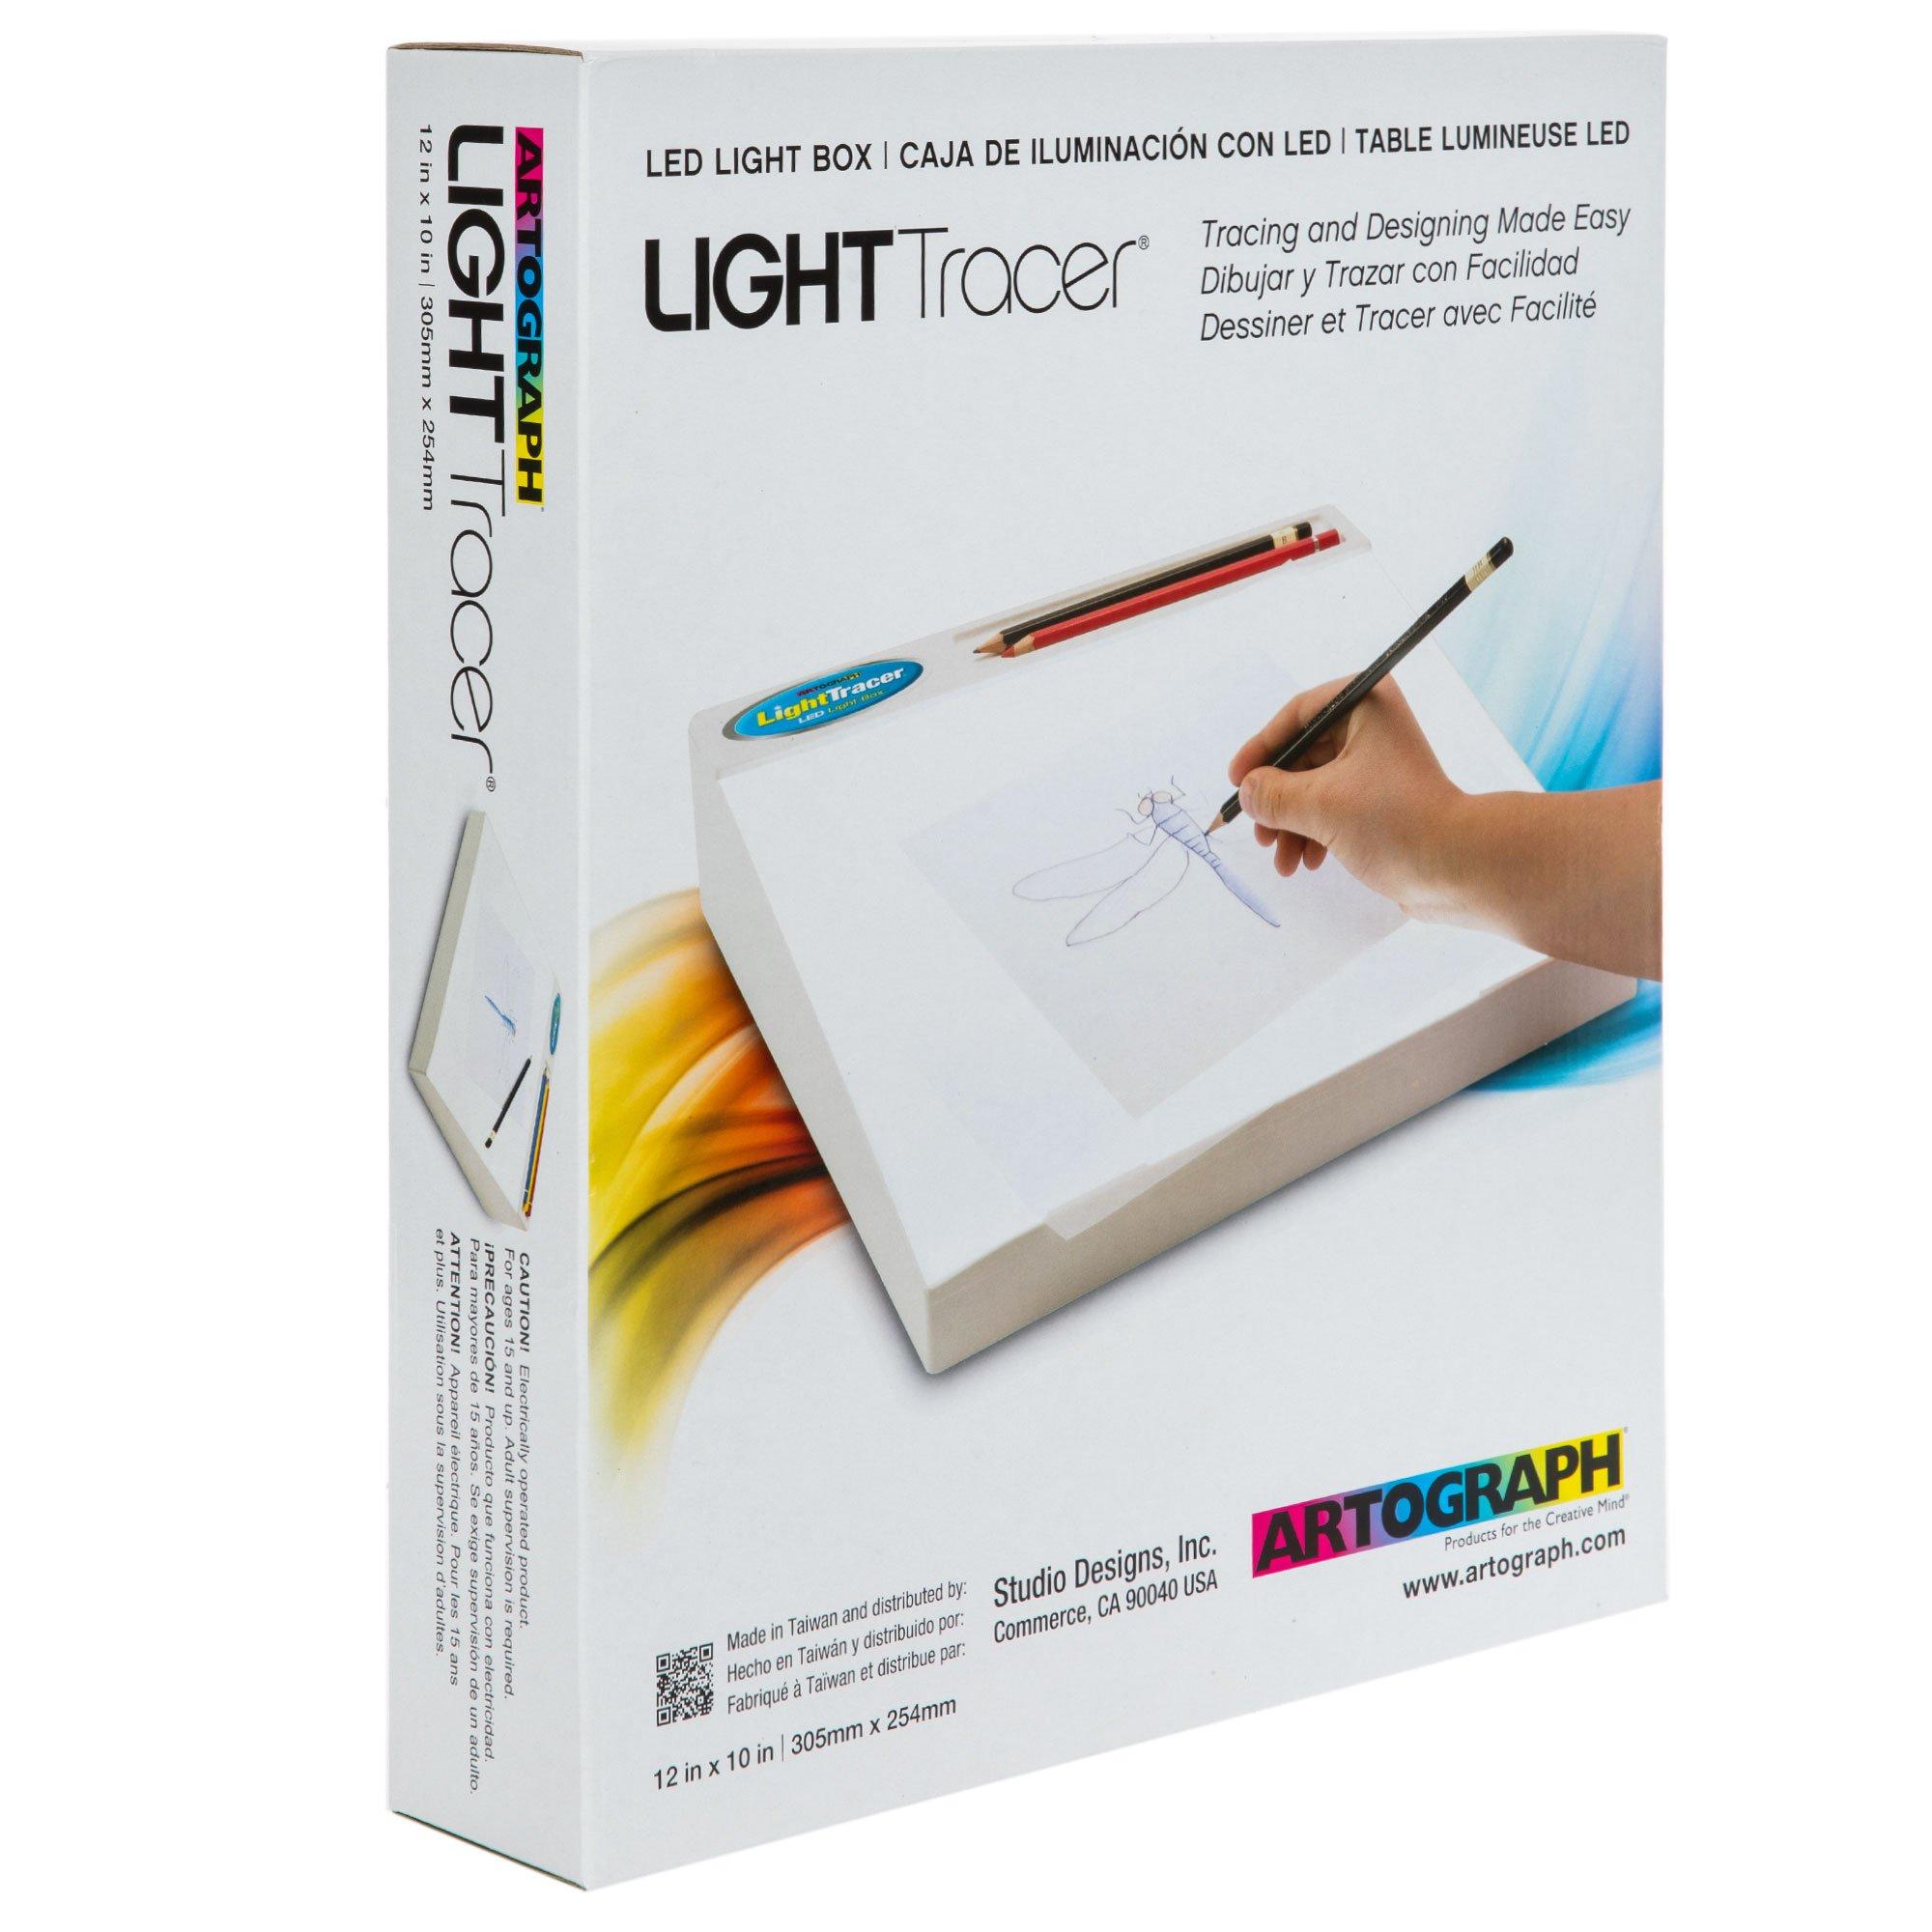 7 Best Light box for tracing ideas  light box for tracing, light box,  light box diy